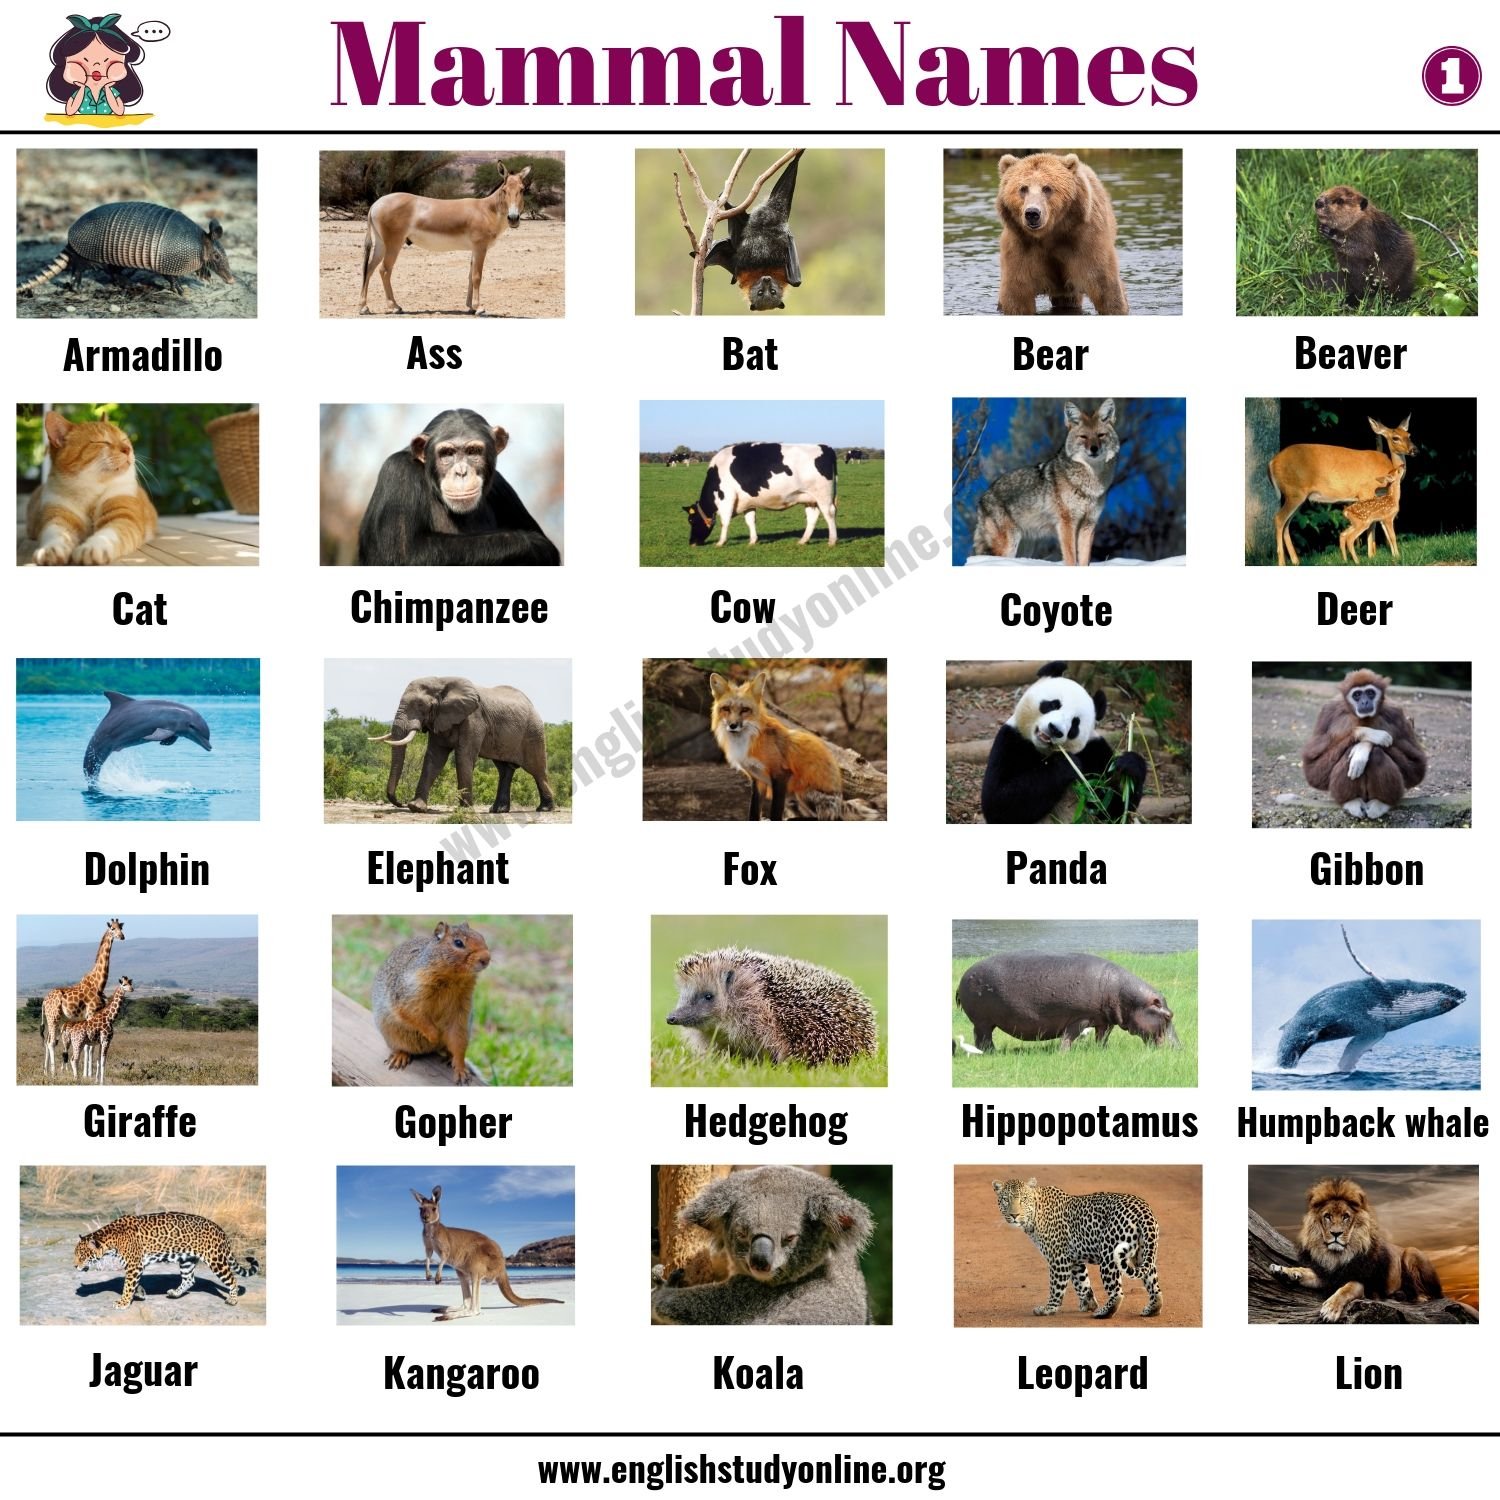 What are some examples of mammals?